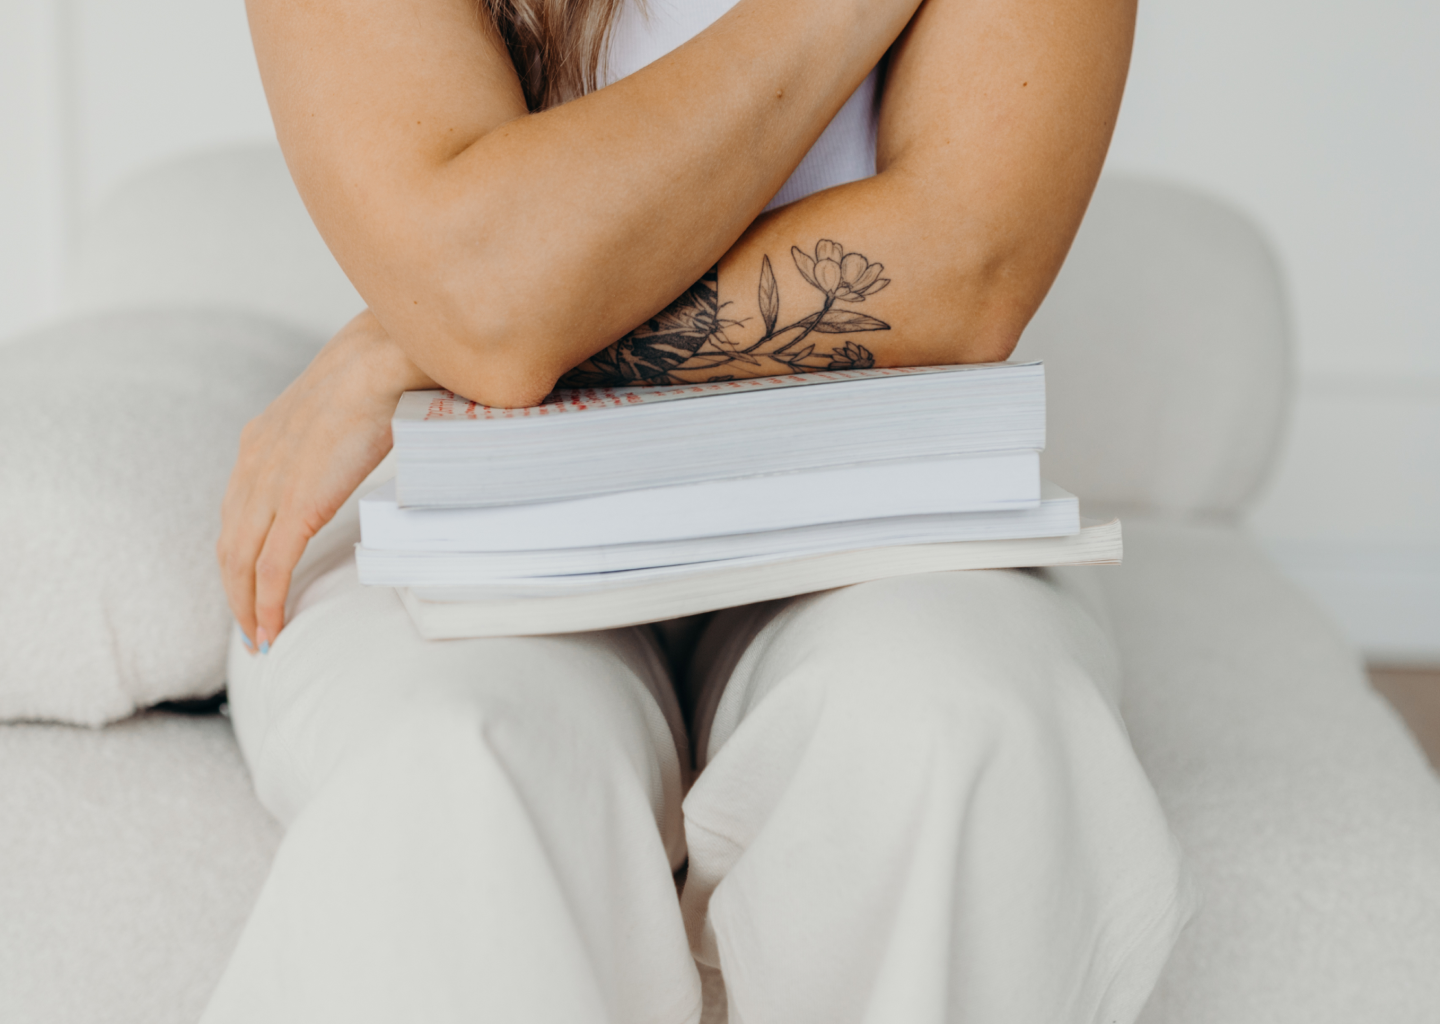 Web and brand designer from Hamilton, Ontario, sitting on a white couch wearing all white with her arms crossed on a stack of books